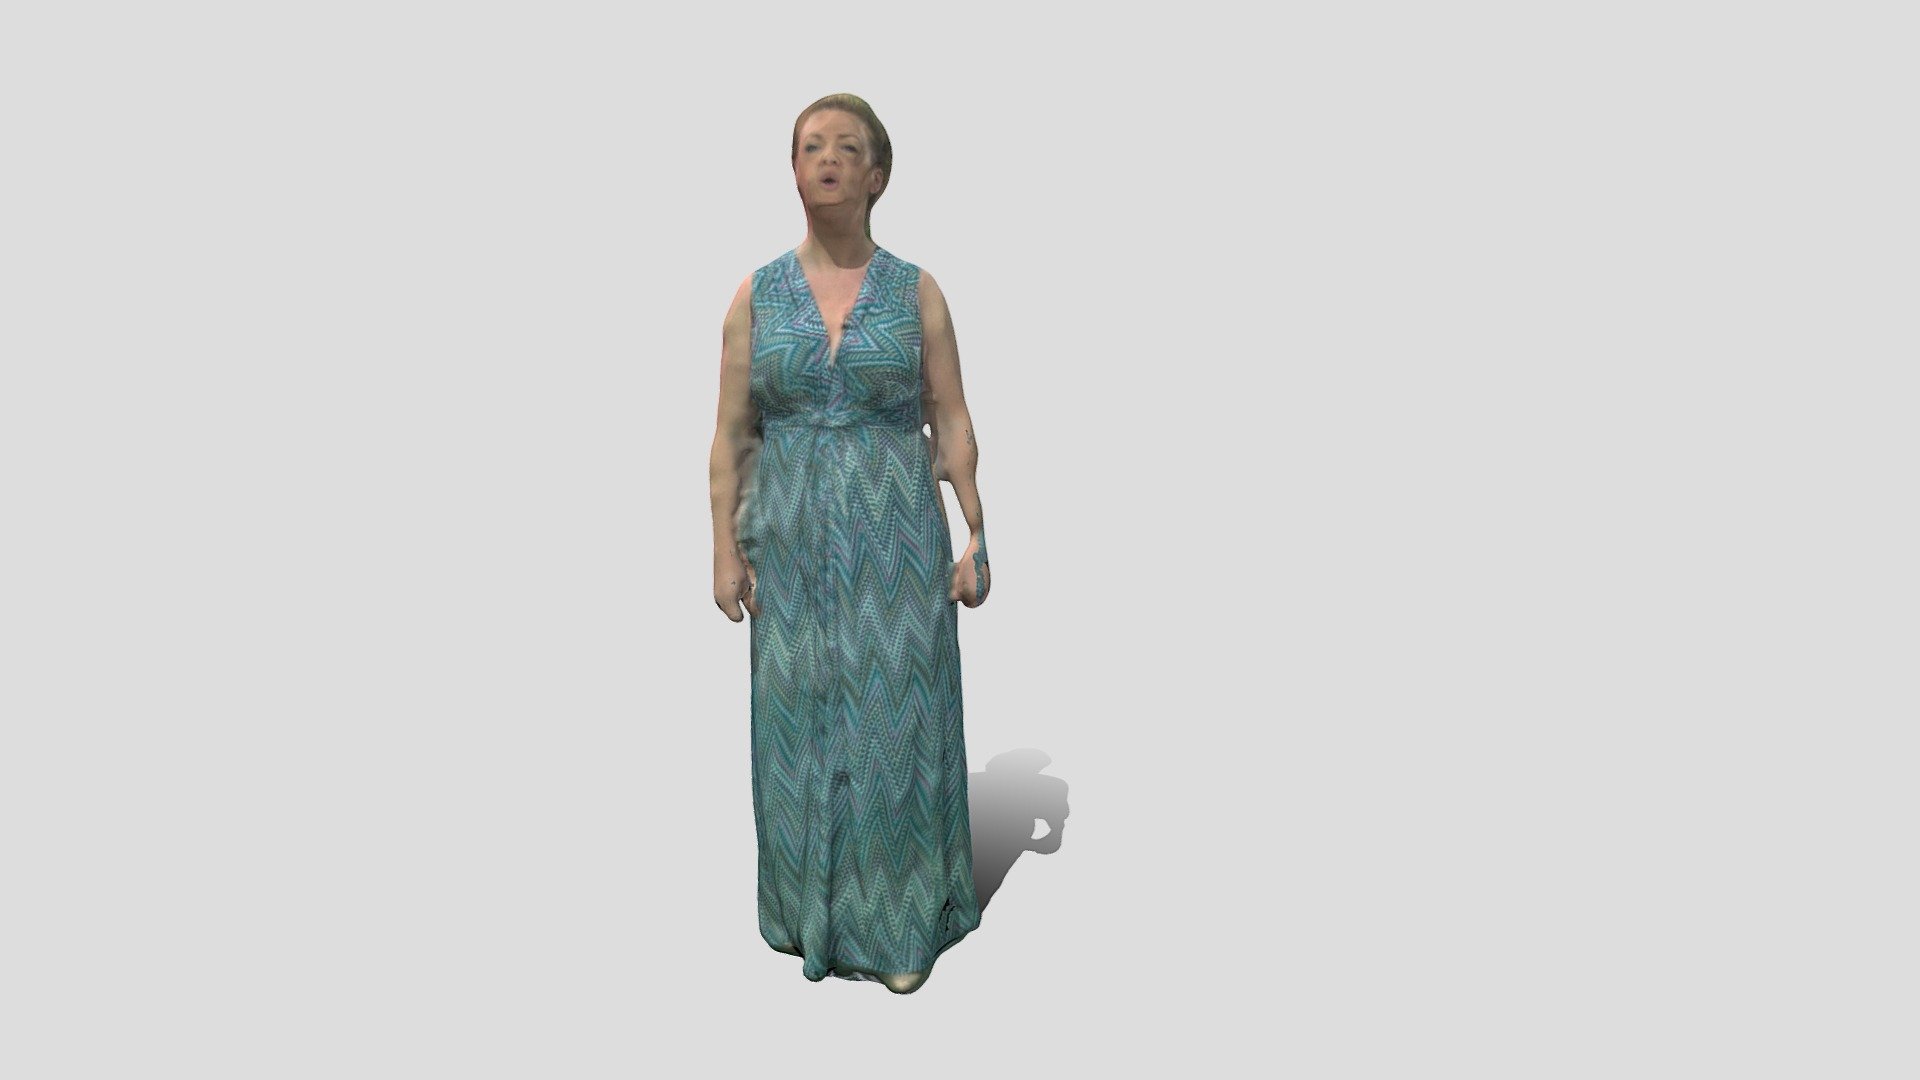 This is a test model for a volumetric video of an operatic performance 3d model